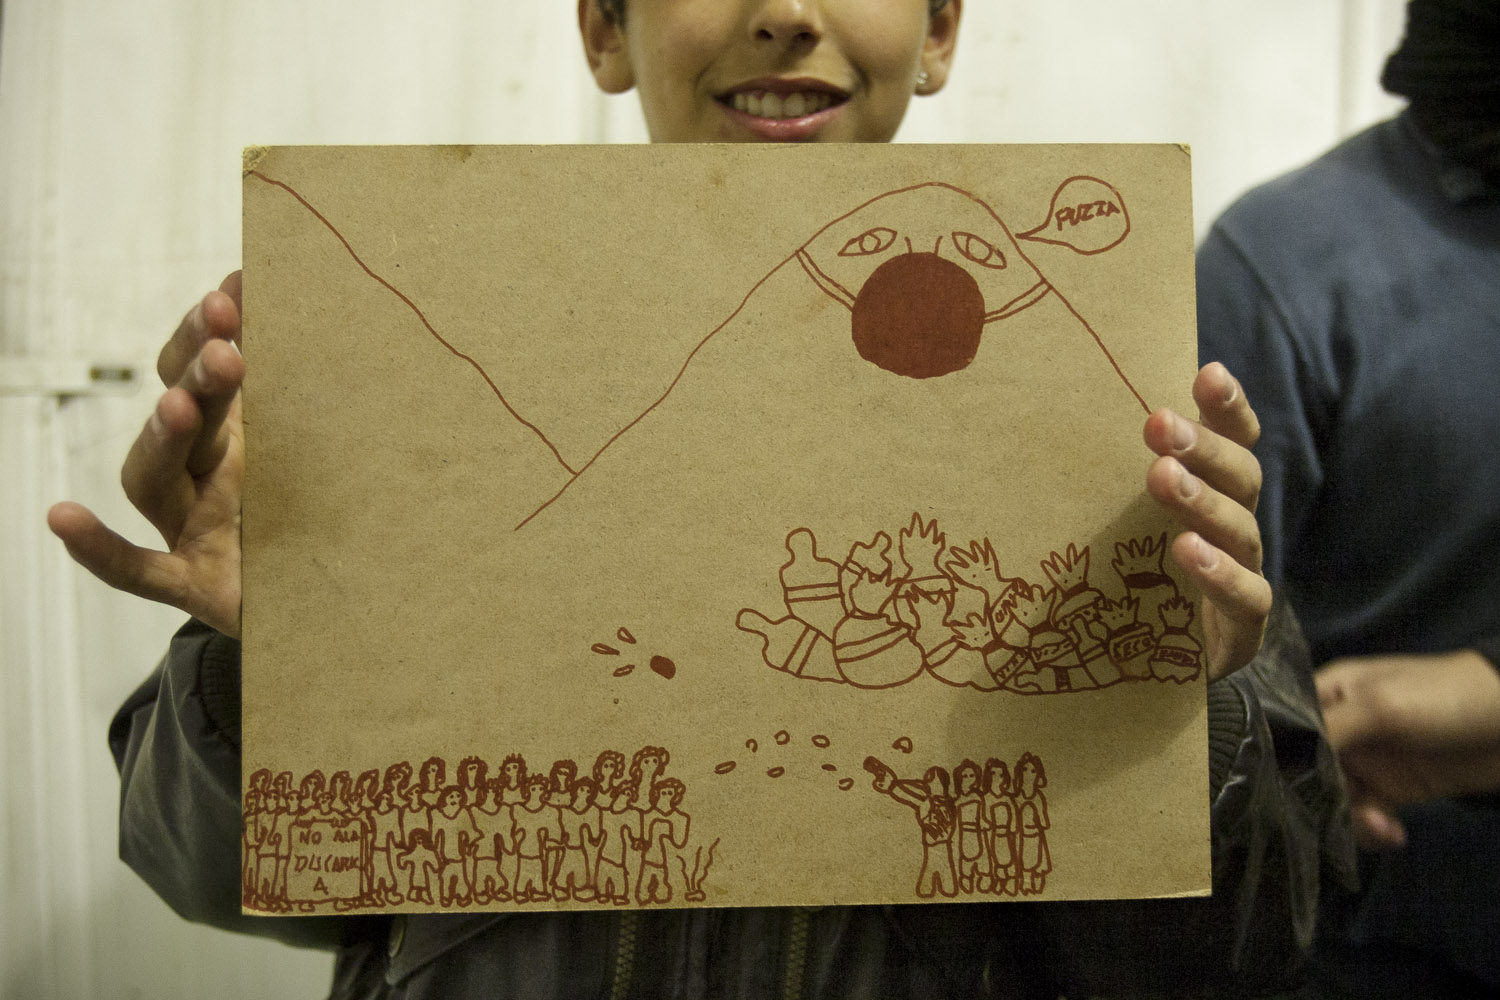 A young protester shows a drawing he made on a piece of carton during a night at the roadblock at Boscoreale's “roundabout”. Towering above the police shooting teargas at protesters, the mount Vesuvio wears a mask and laments the stench of the accumulated garbage.